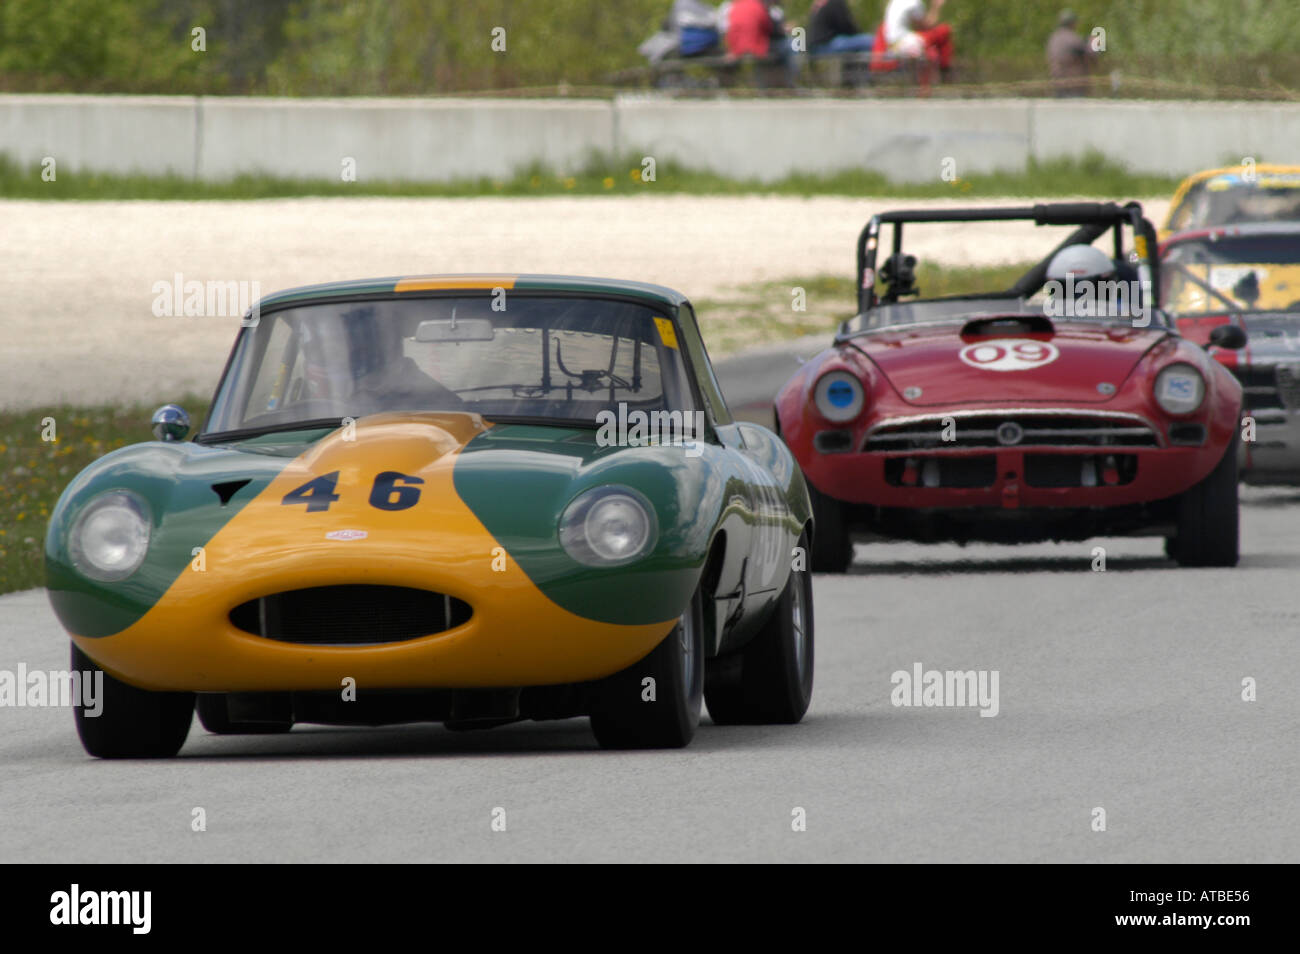 George Stauffer races his 1963 Jaguar XK E at the SVRA Vintage GT Challenge at Road America 2004 as a Sunbeam Tiger follows Stock Photo